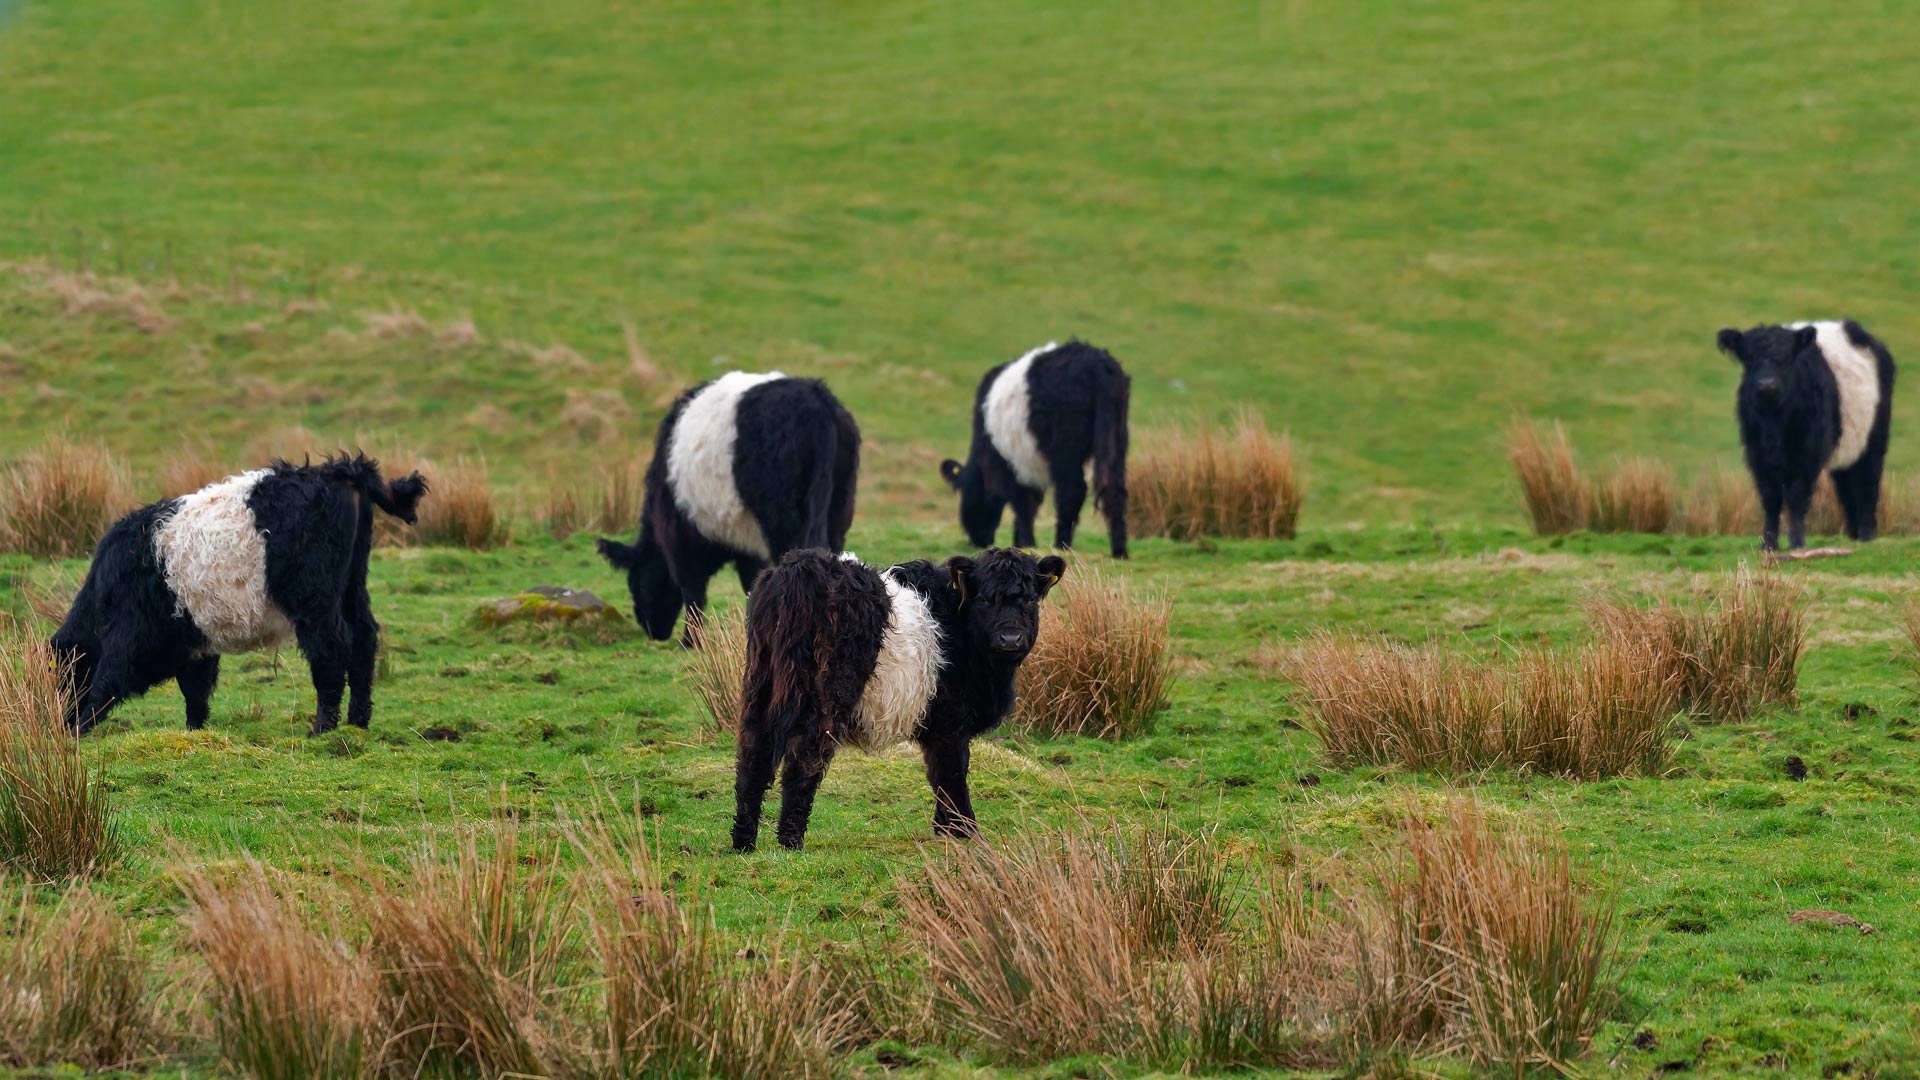 Belted Galloway cows in Scotland - JohnFScott/Getty Images)